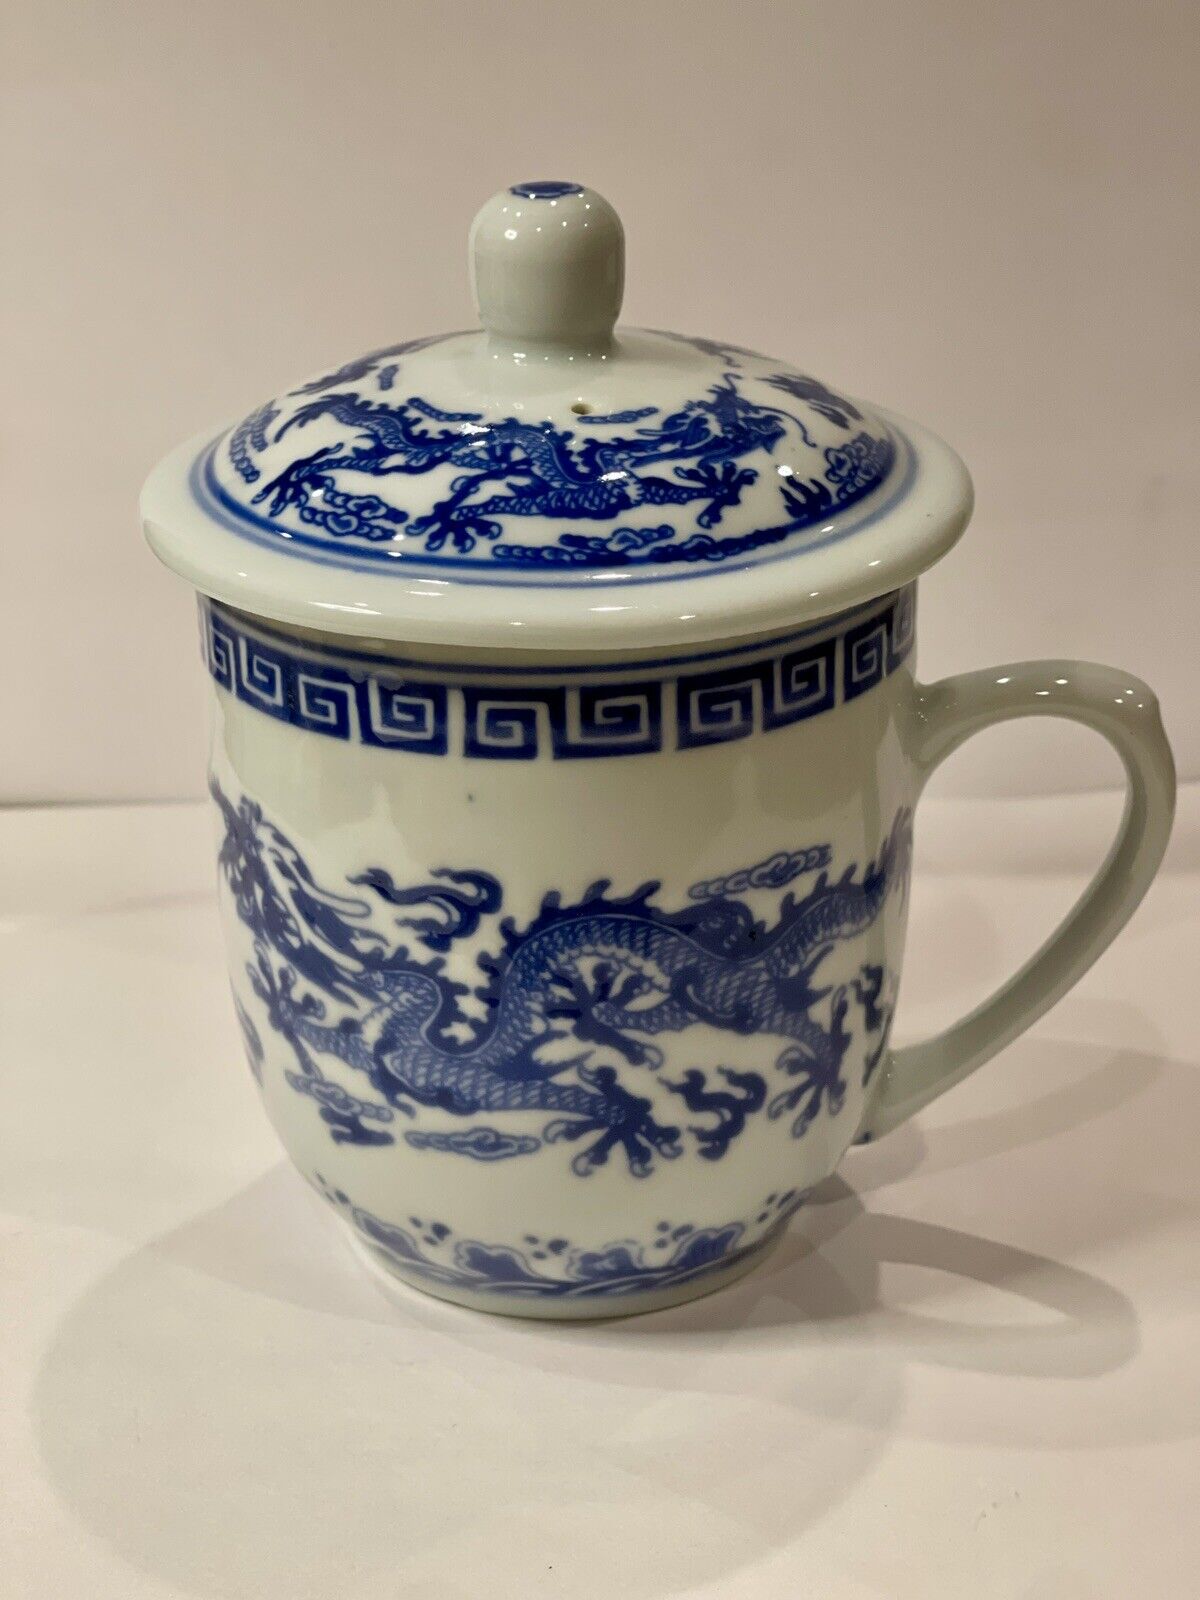 Jingdezhen Chinese  Porcelain Coffee Tea Cup W/ Lid Blue and White With Dragons